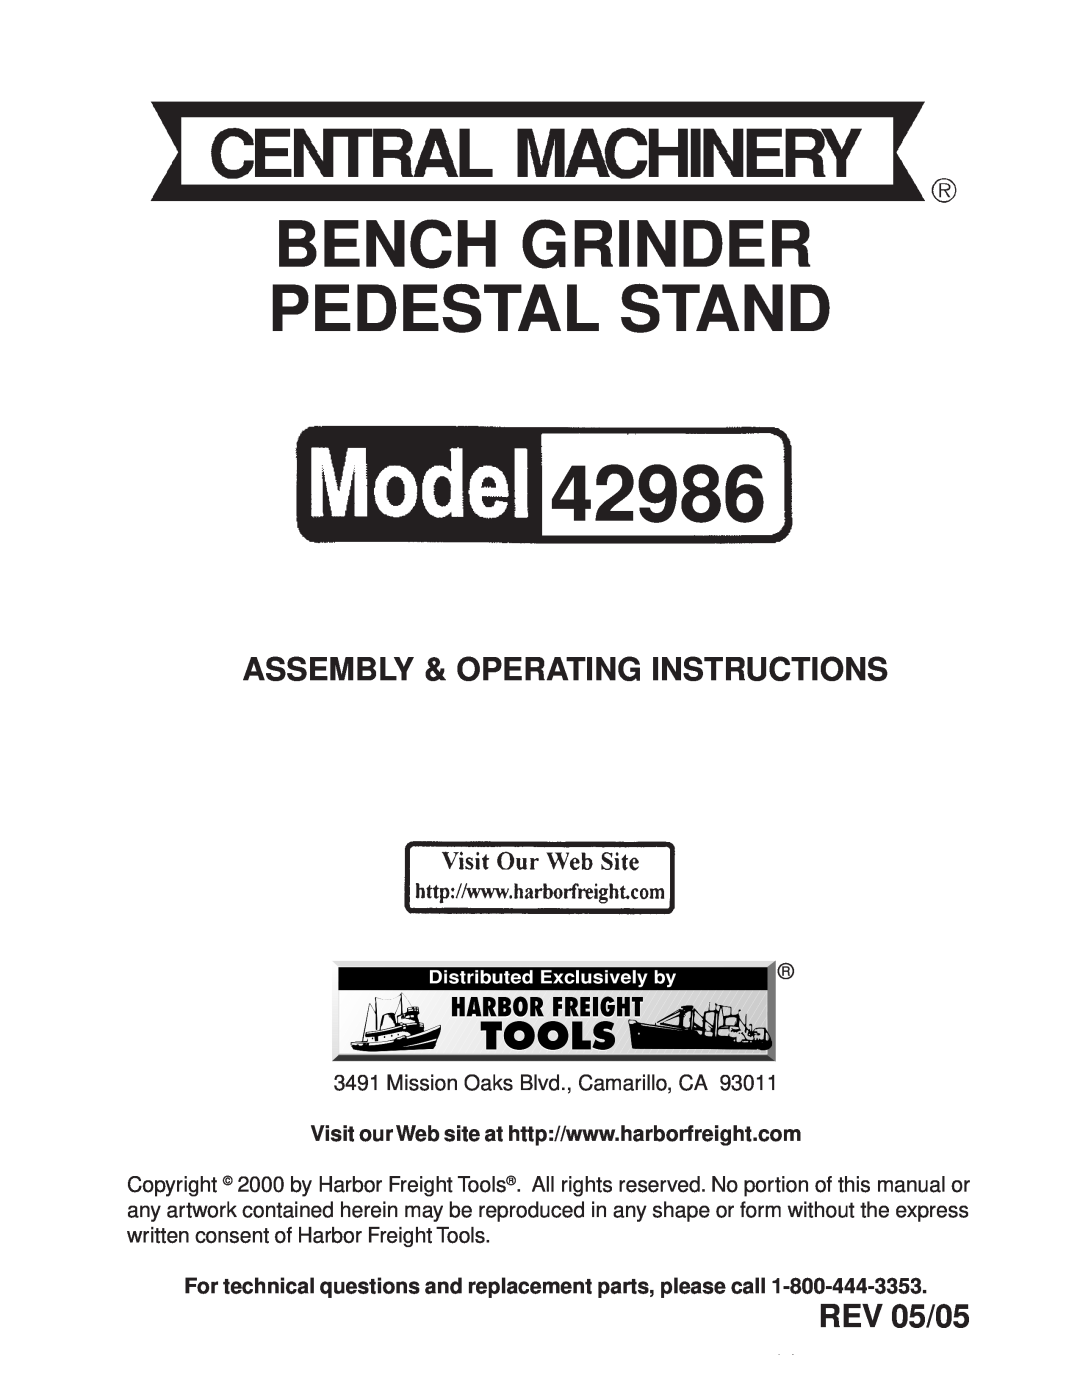 Harbor Freight Tools 42986 operating instructions For technical questions and replacement parts, please call, REV 05/05 